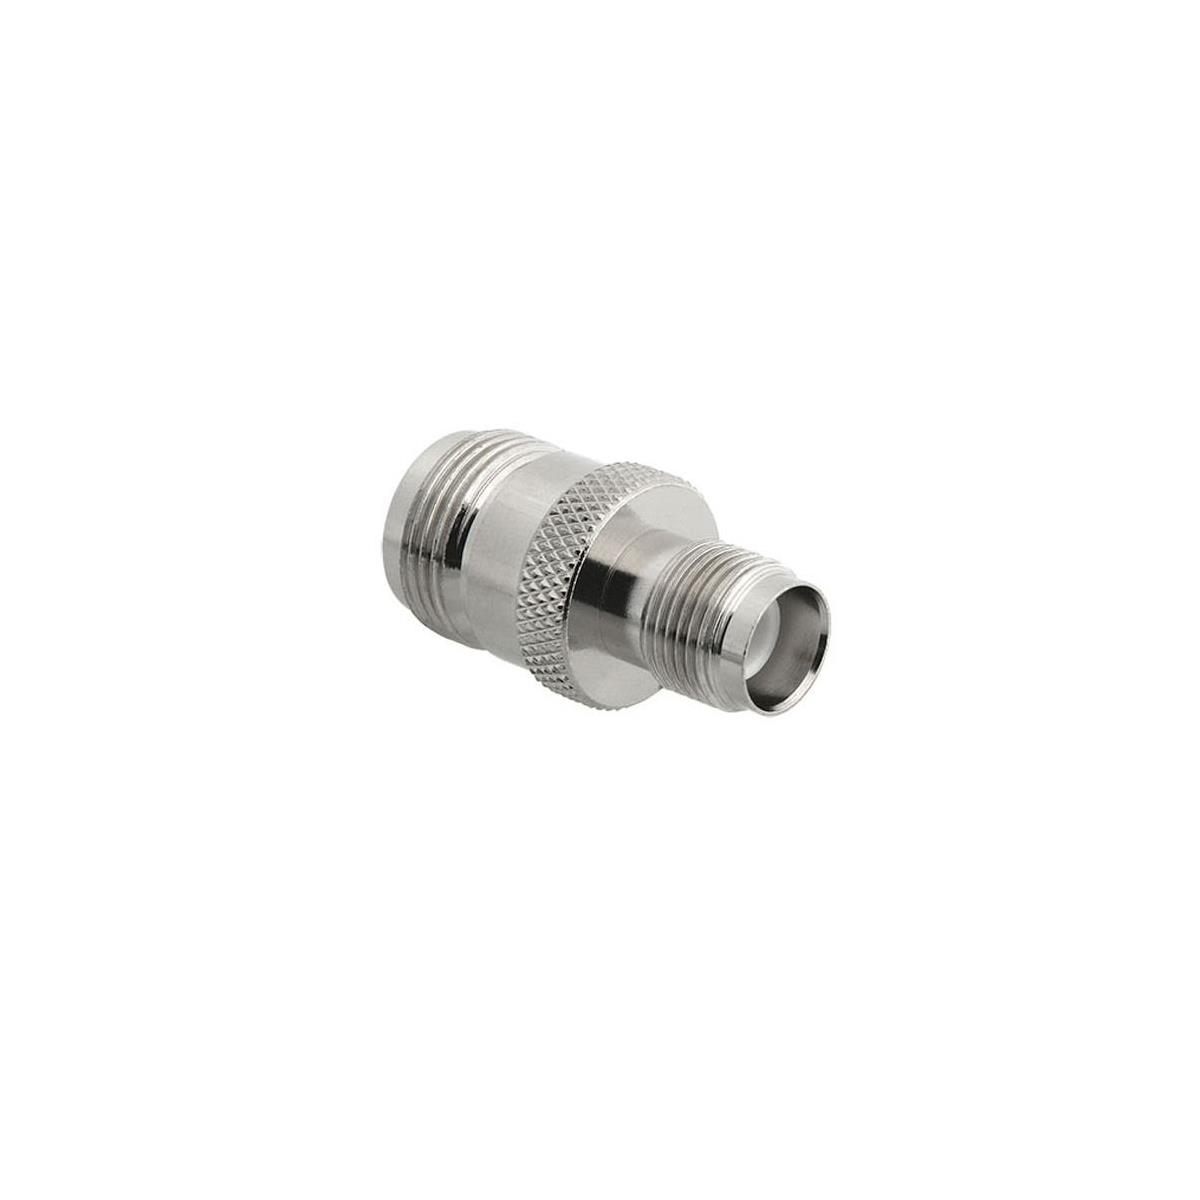 Image of Lumen Radio LumenRadio Coaxial Cable Adapter N-Female to RP-TNC Female